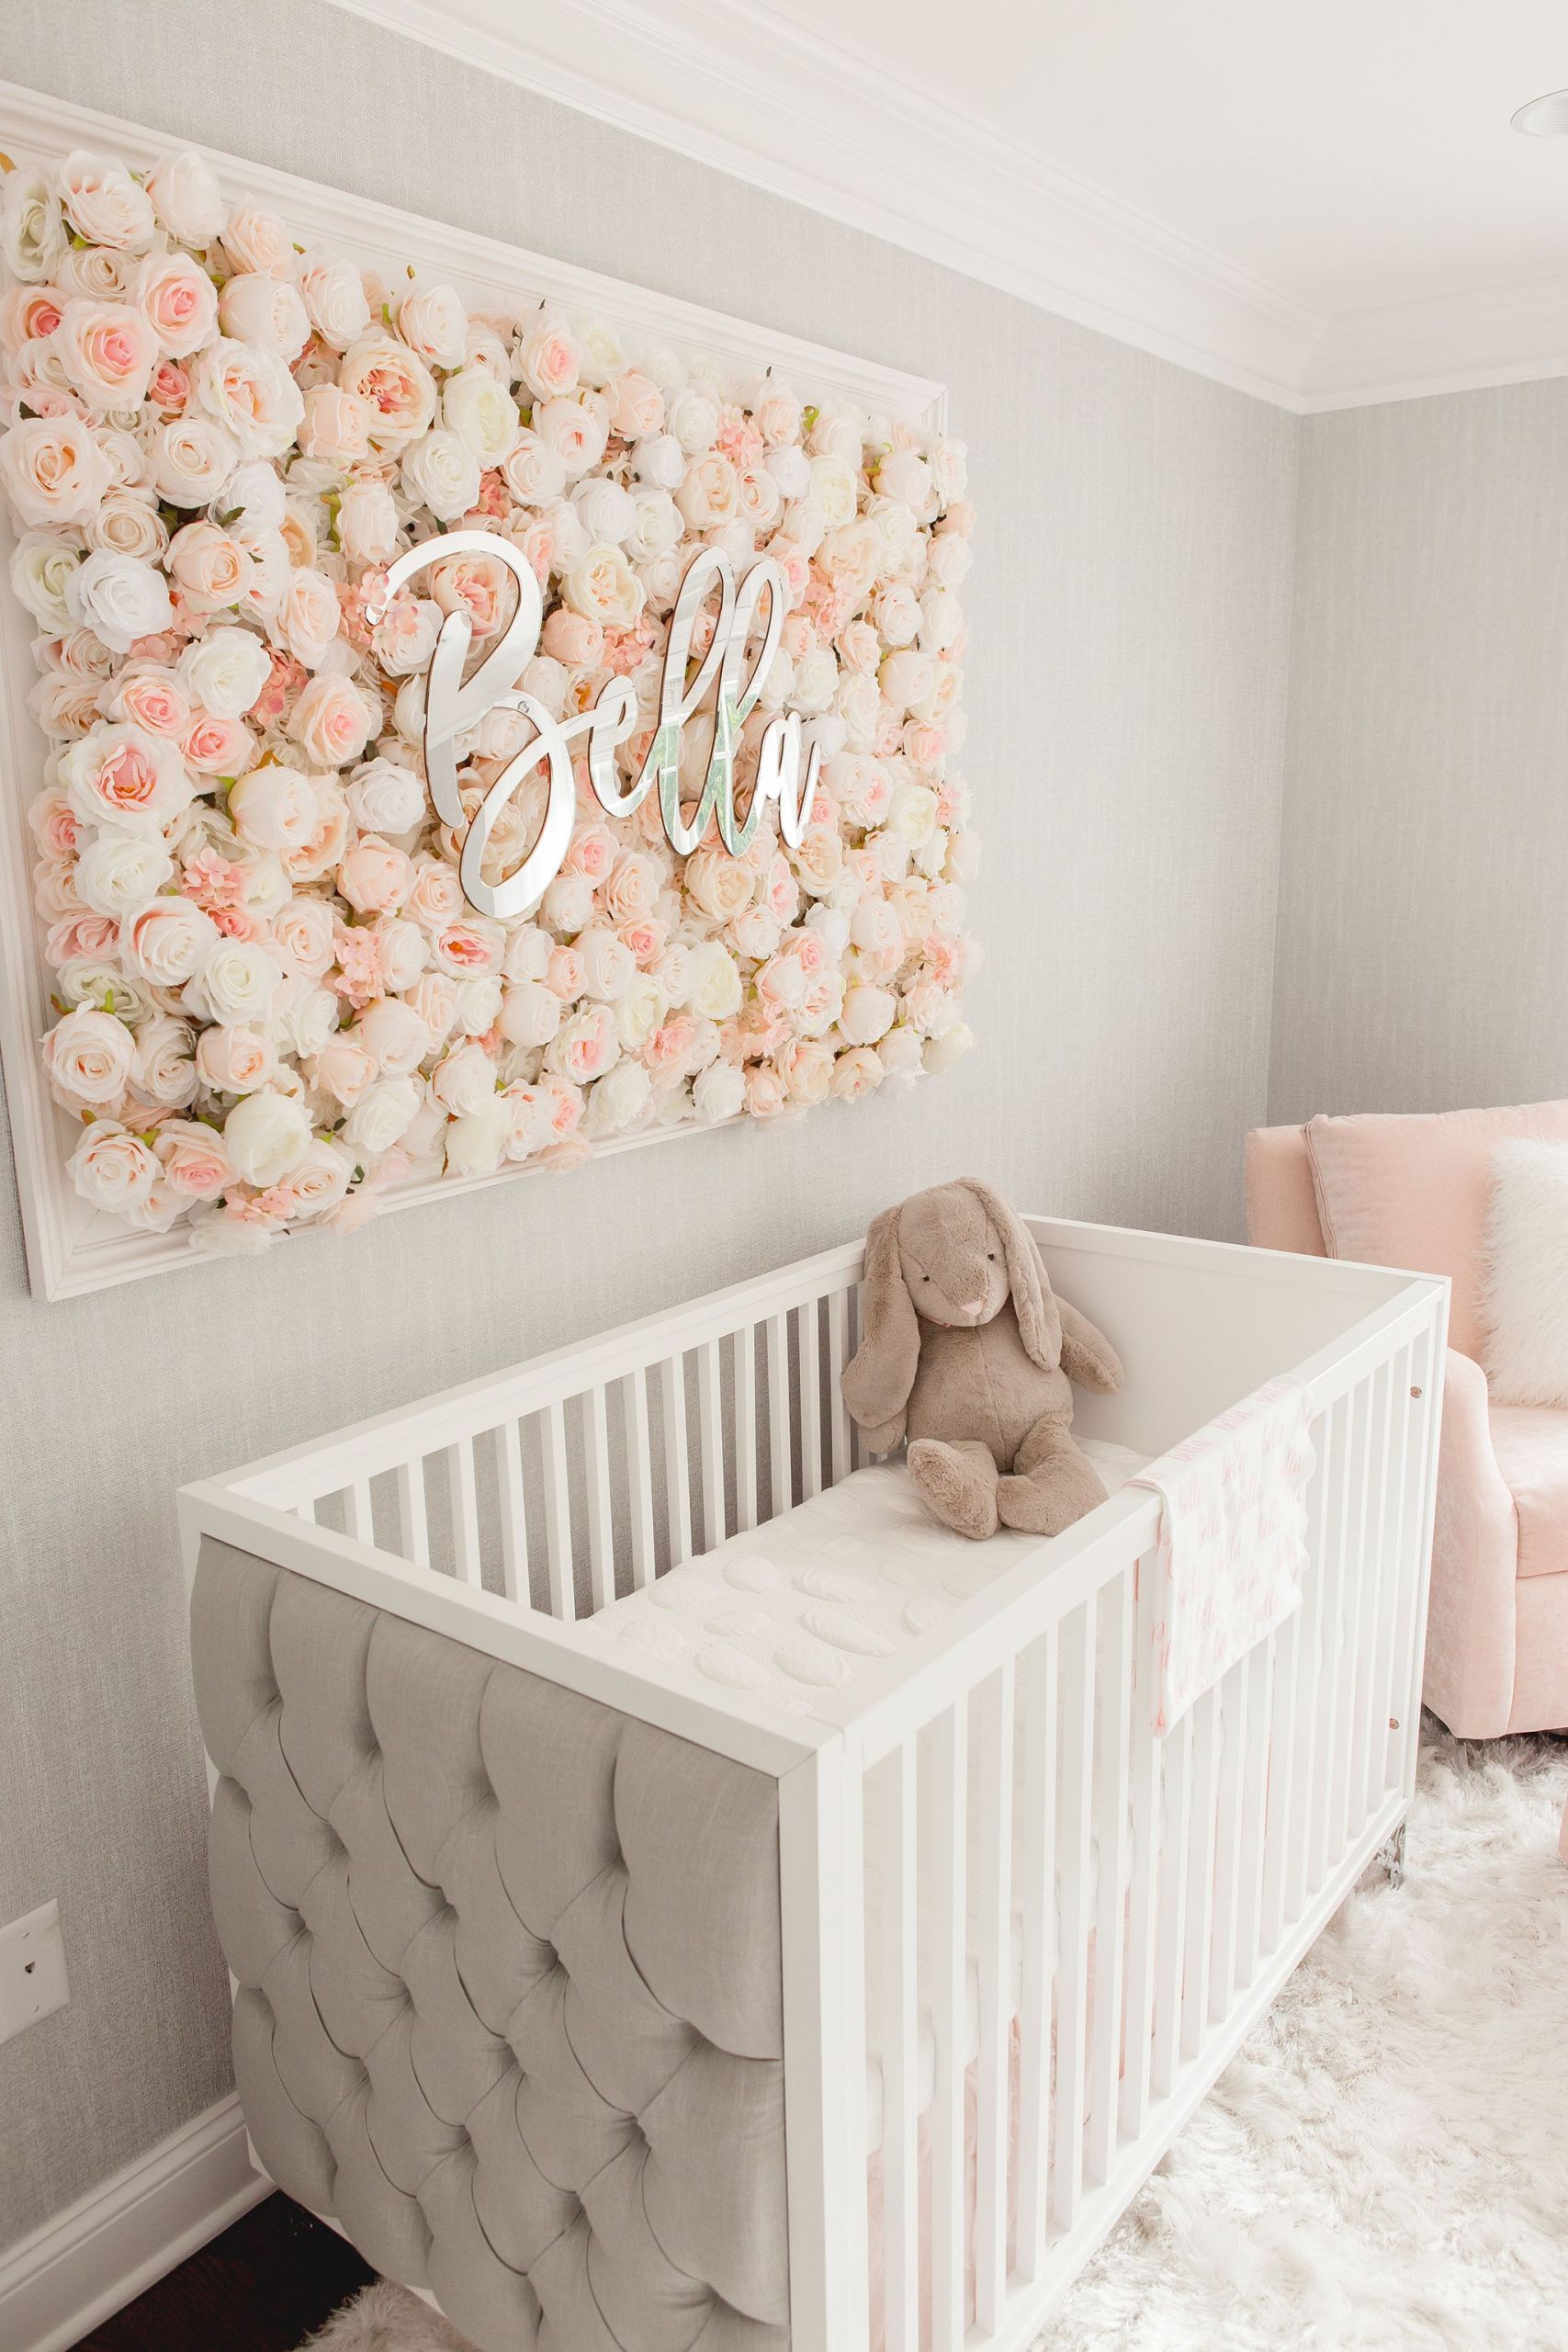 Baby Girl Nursery Wall Decor Ideas
 Guess Which Celebrity Nursery Inspired this Gorgeous Space